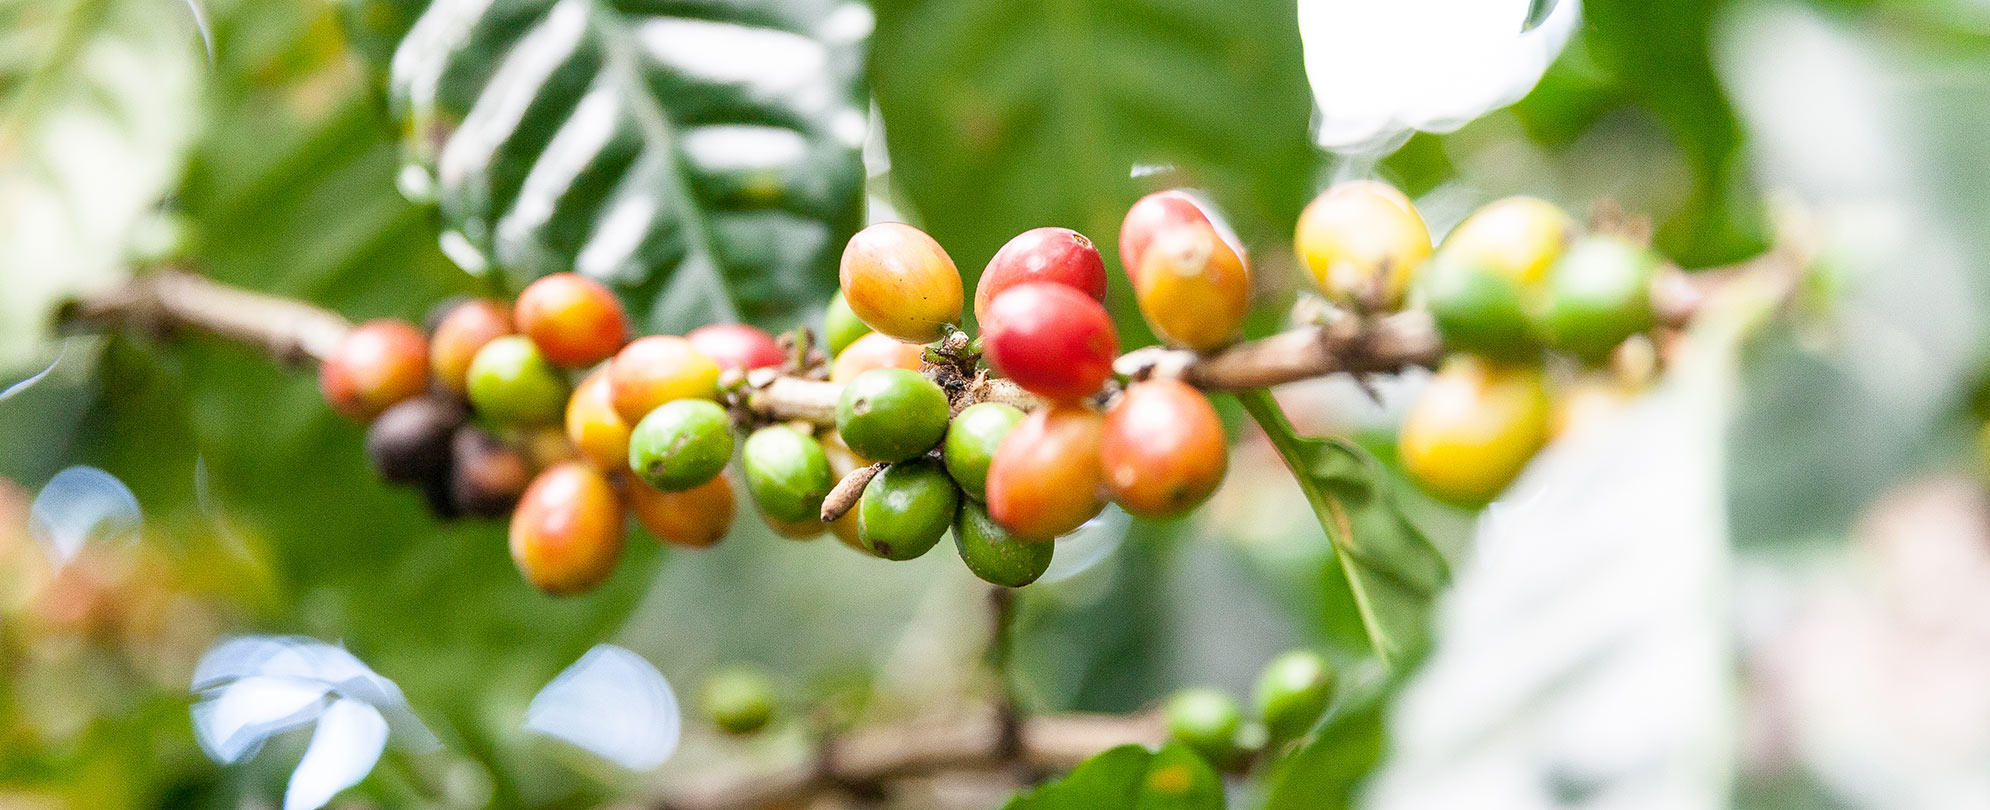 Red, yellow, and green berries grow on a coffee plant in Puerto Rico.